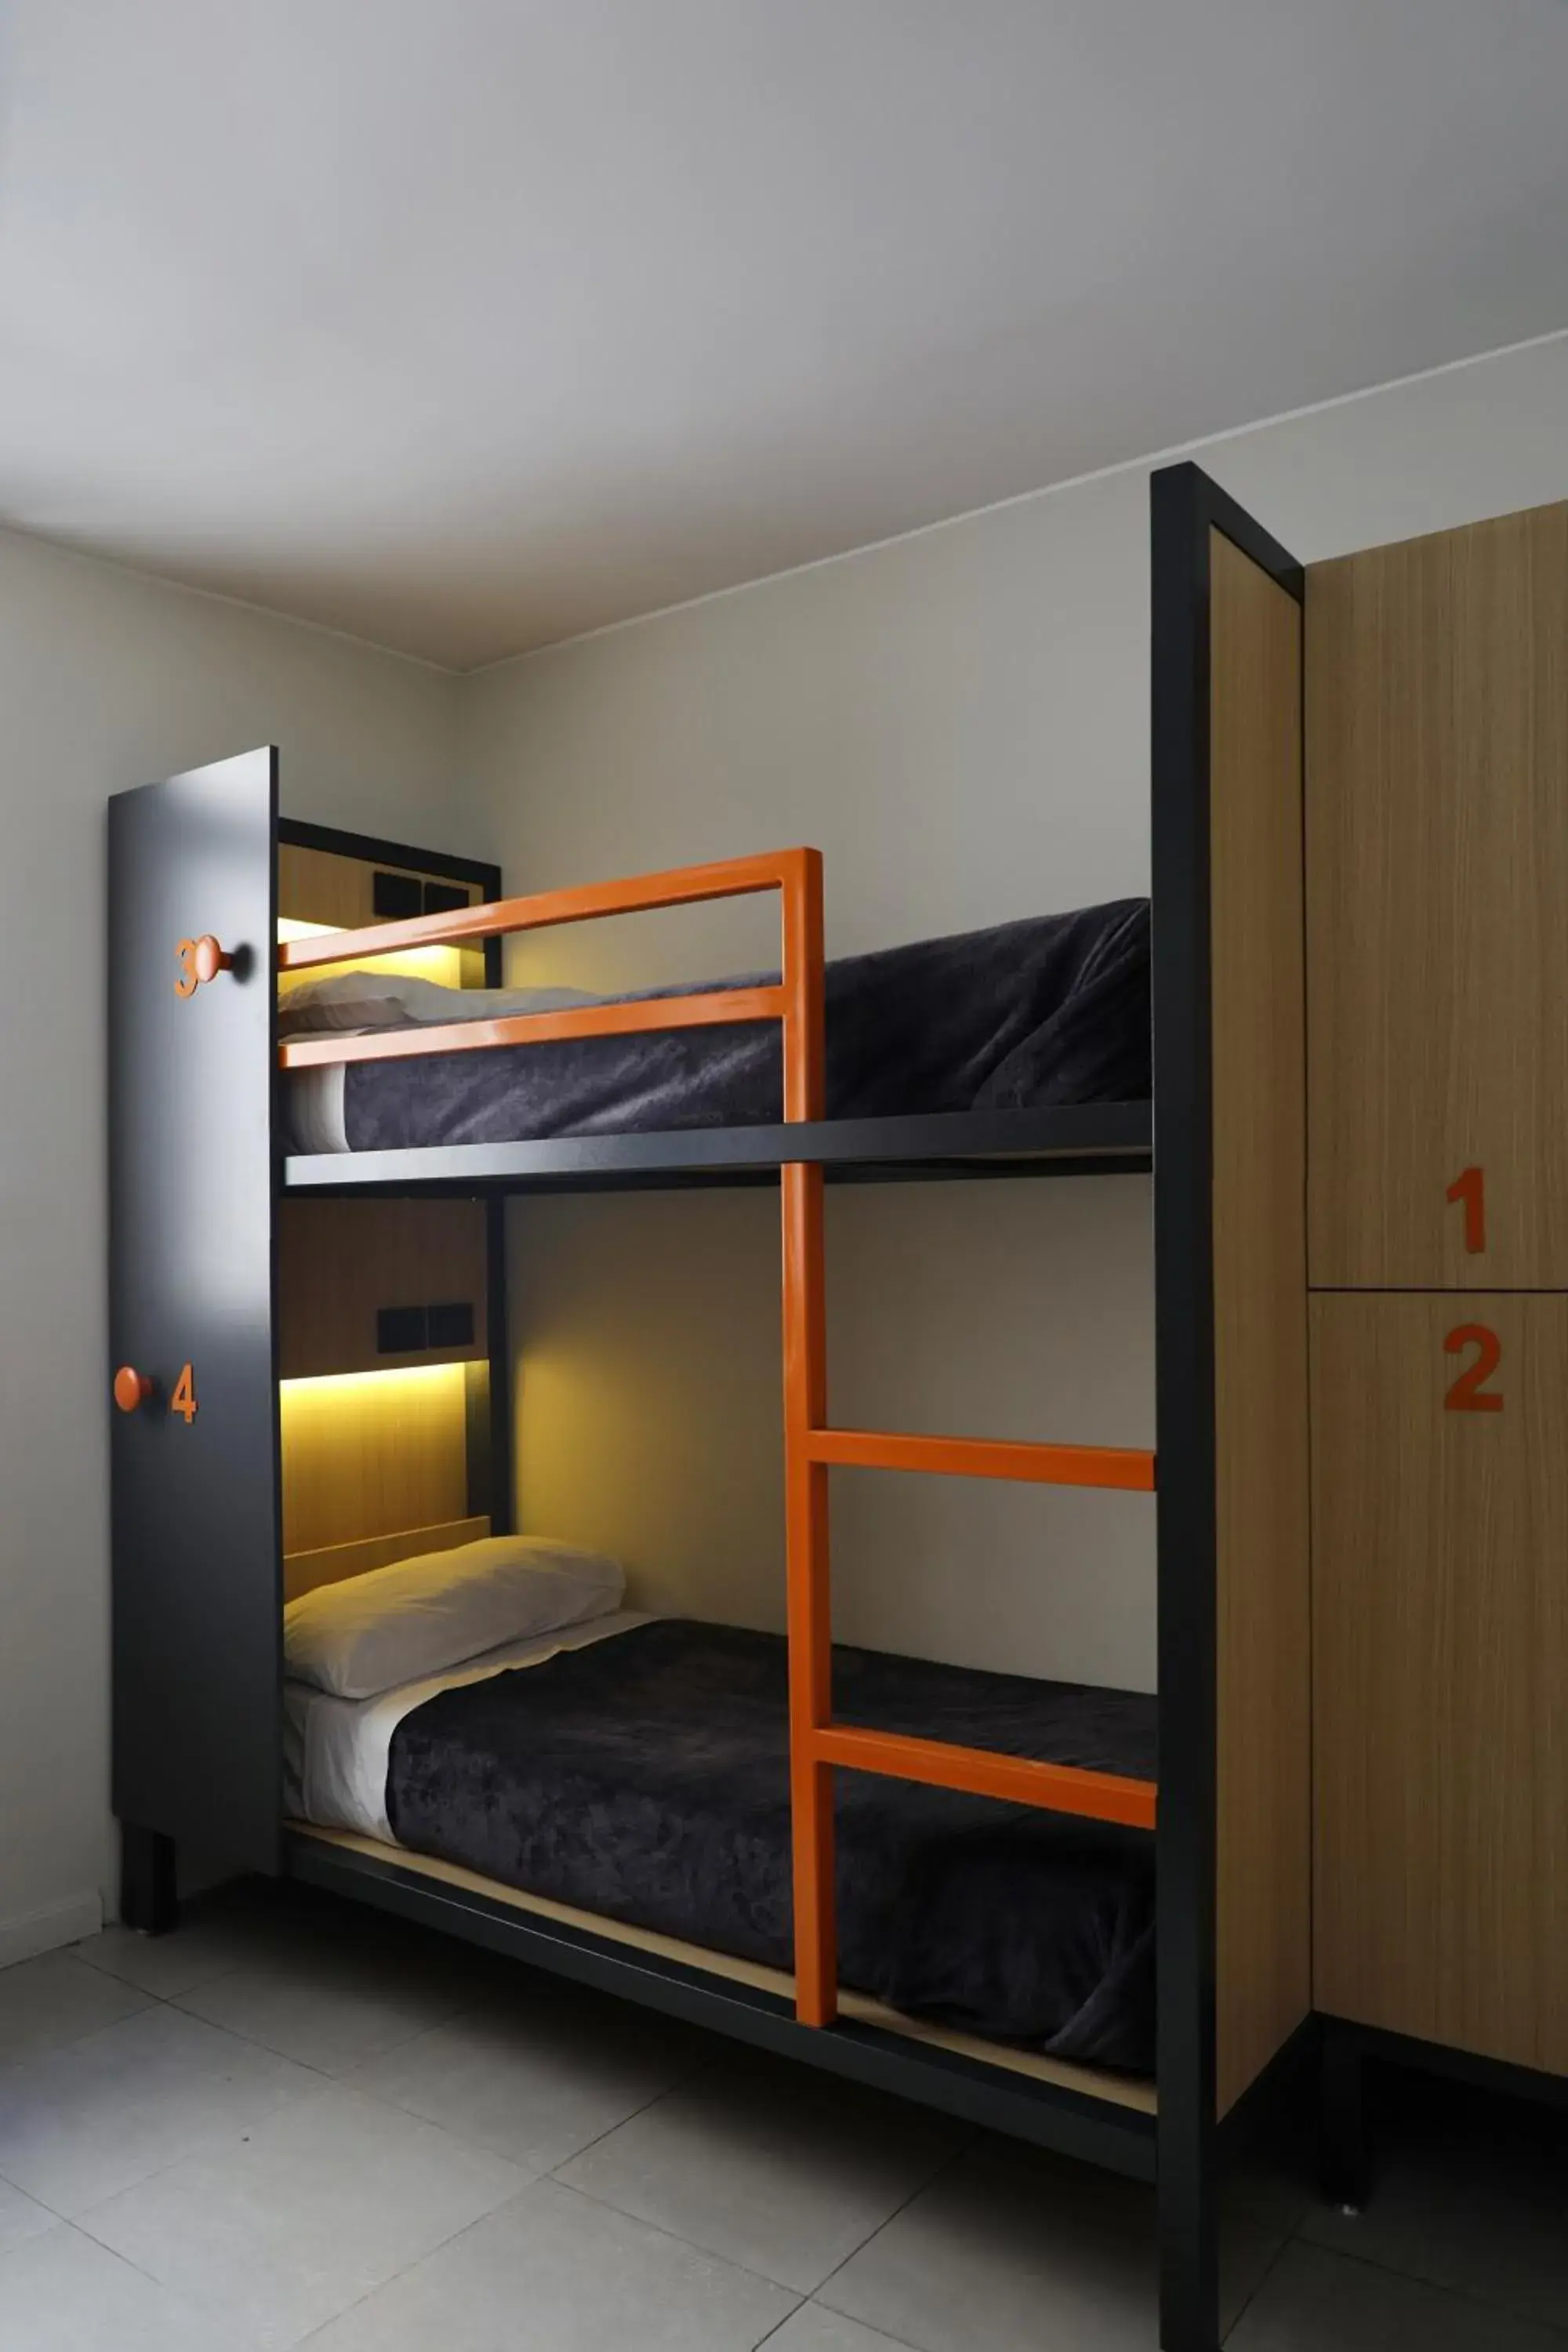 Other, Bunk Bed in America Del Sur Hostel Buenos Aires